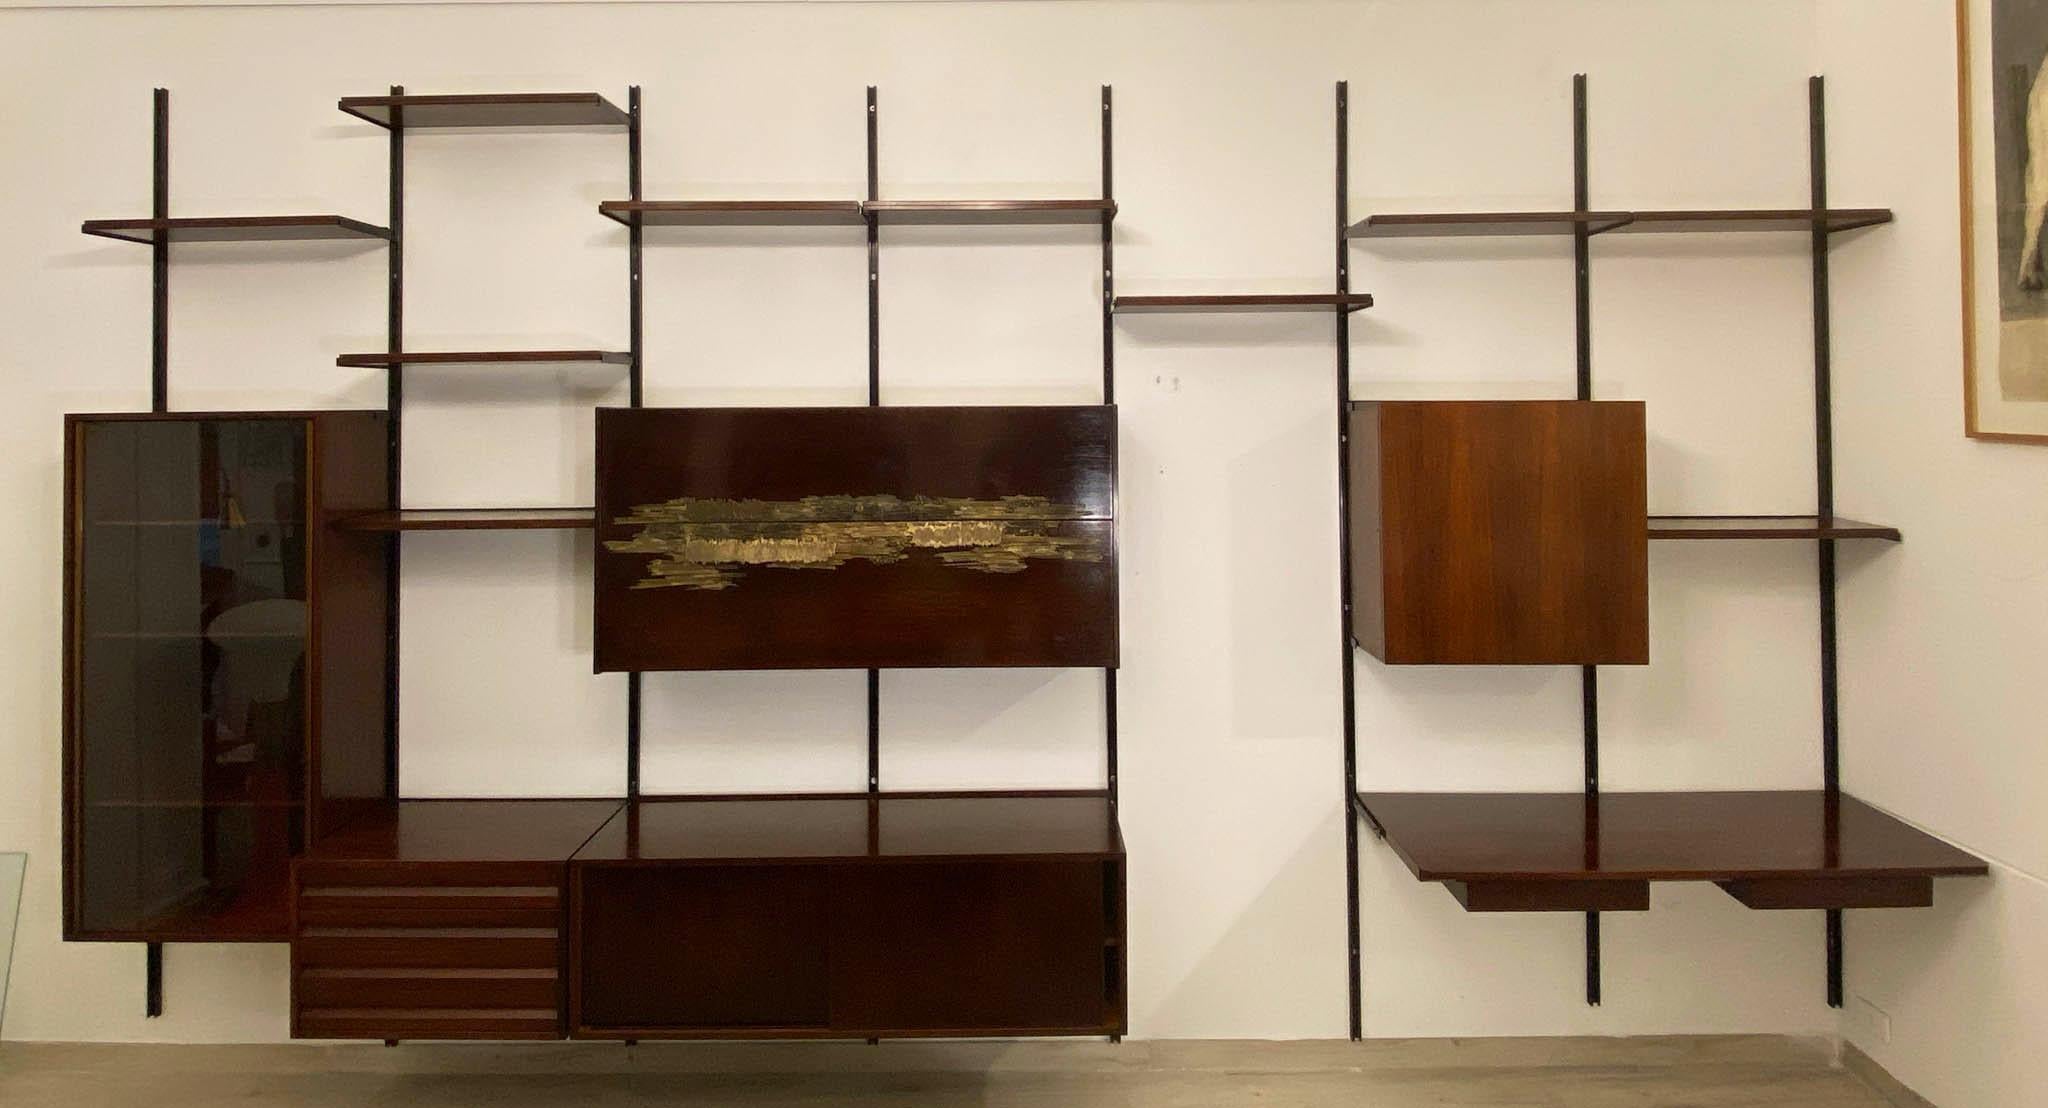 Osvaldo Borsani for Tecno, E22 wall unit with Arnaldo Pomorodo sculpture, wood, bronze, metal, glass, Italy, 1957

Diverse wall shelf by Osvaldo Borsani for Tecno. Borsani has conceived the E22 as a coordinated system to furnish both the home and